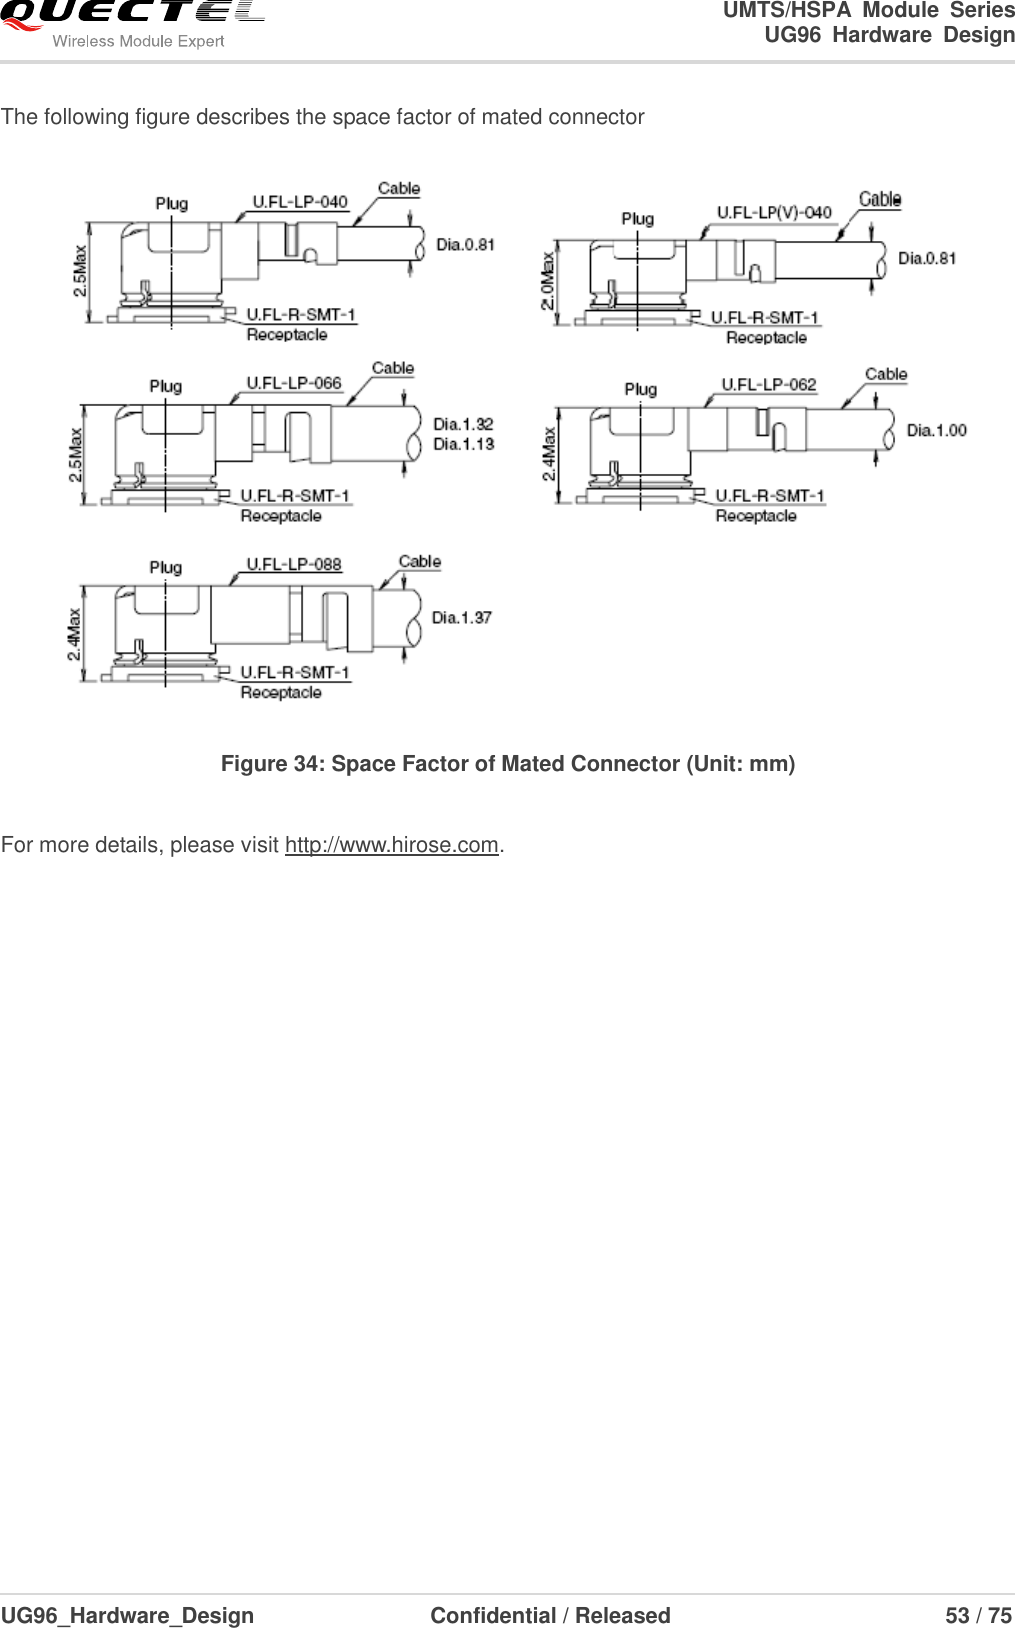                                                                        UMTS/HSPA  Module  Series                                                                 UG96  Hardware  Design  UG96_Hardware_Design                  Confidential / Released                             53 / 75    The following figure describes the space factor of mated connector   Figure 34: Space Factor of Mated Connector (Unit: mm)  For more details, please visit http://www.hirose.com.  